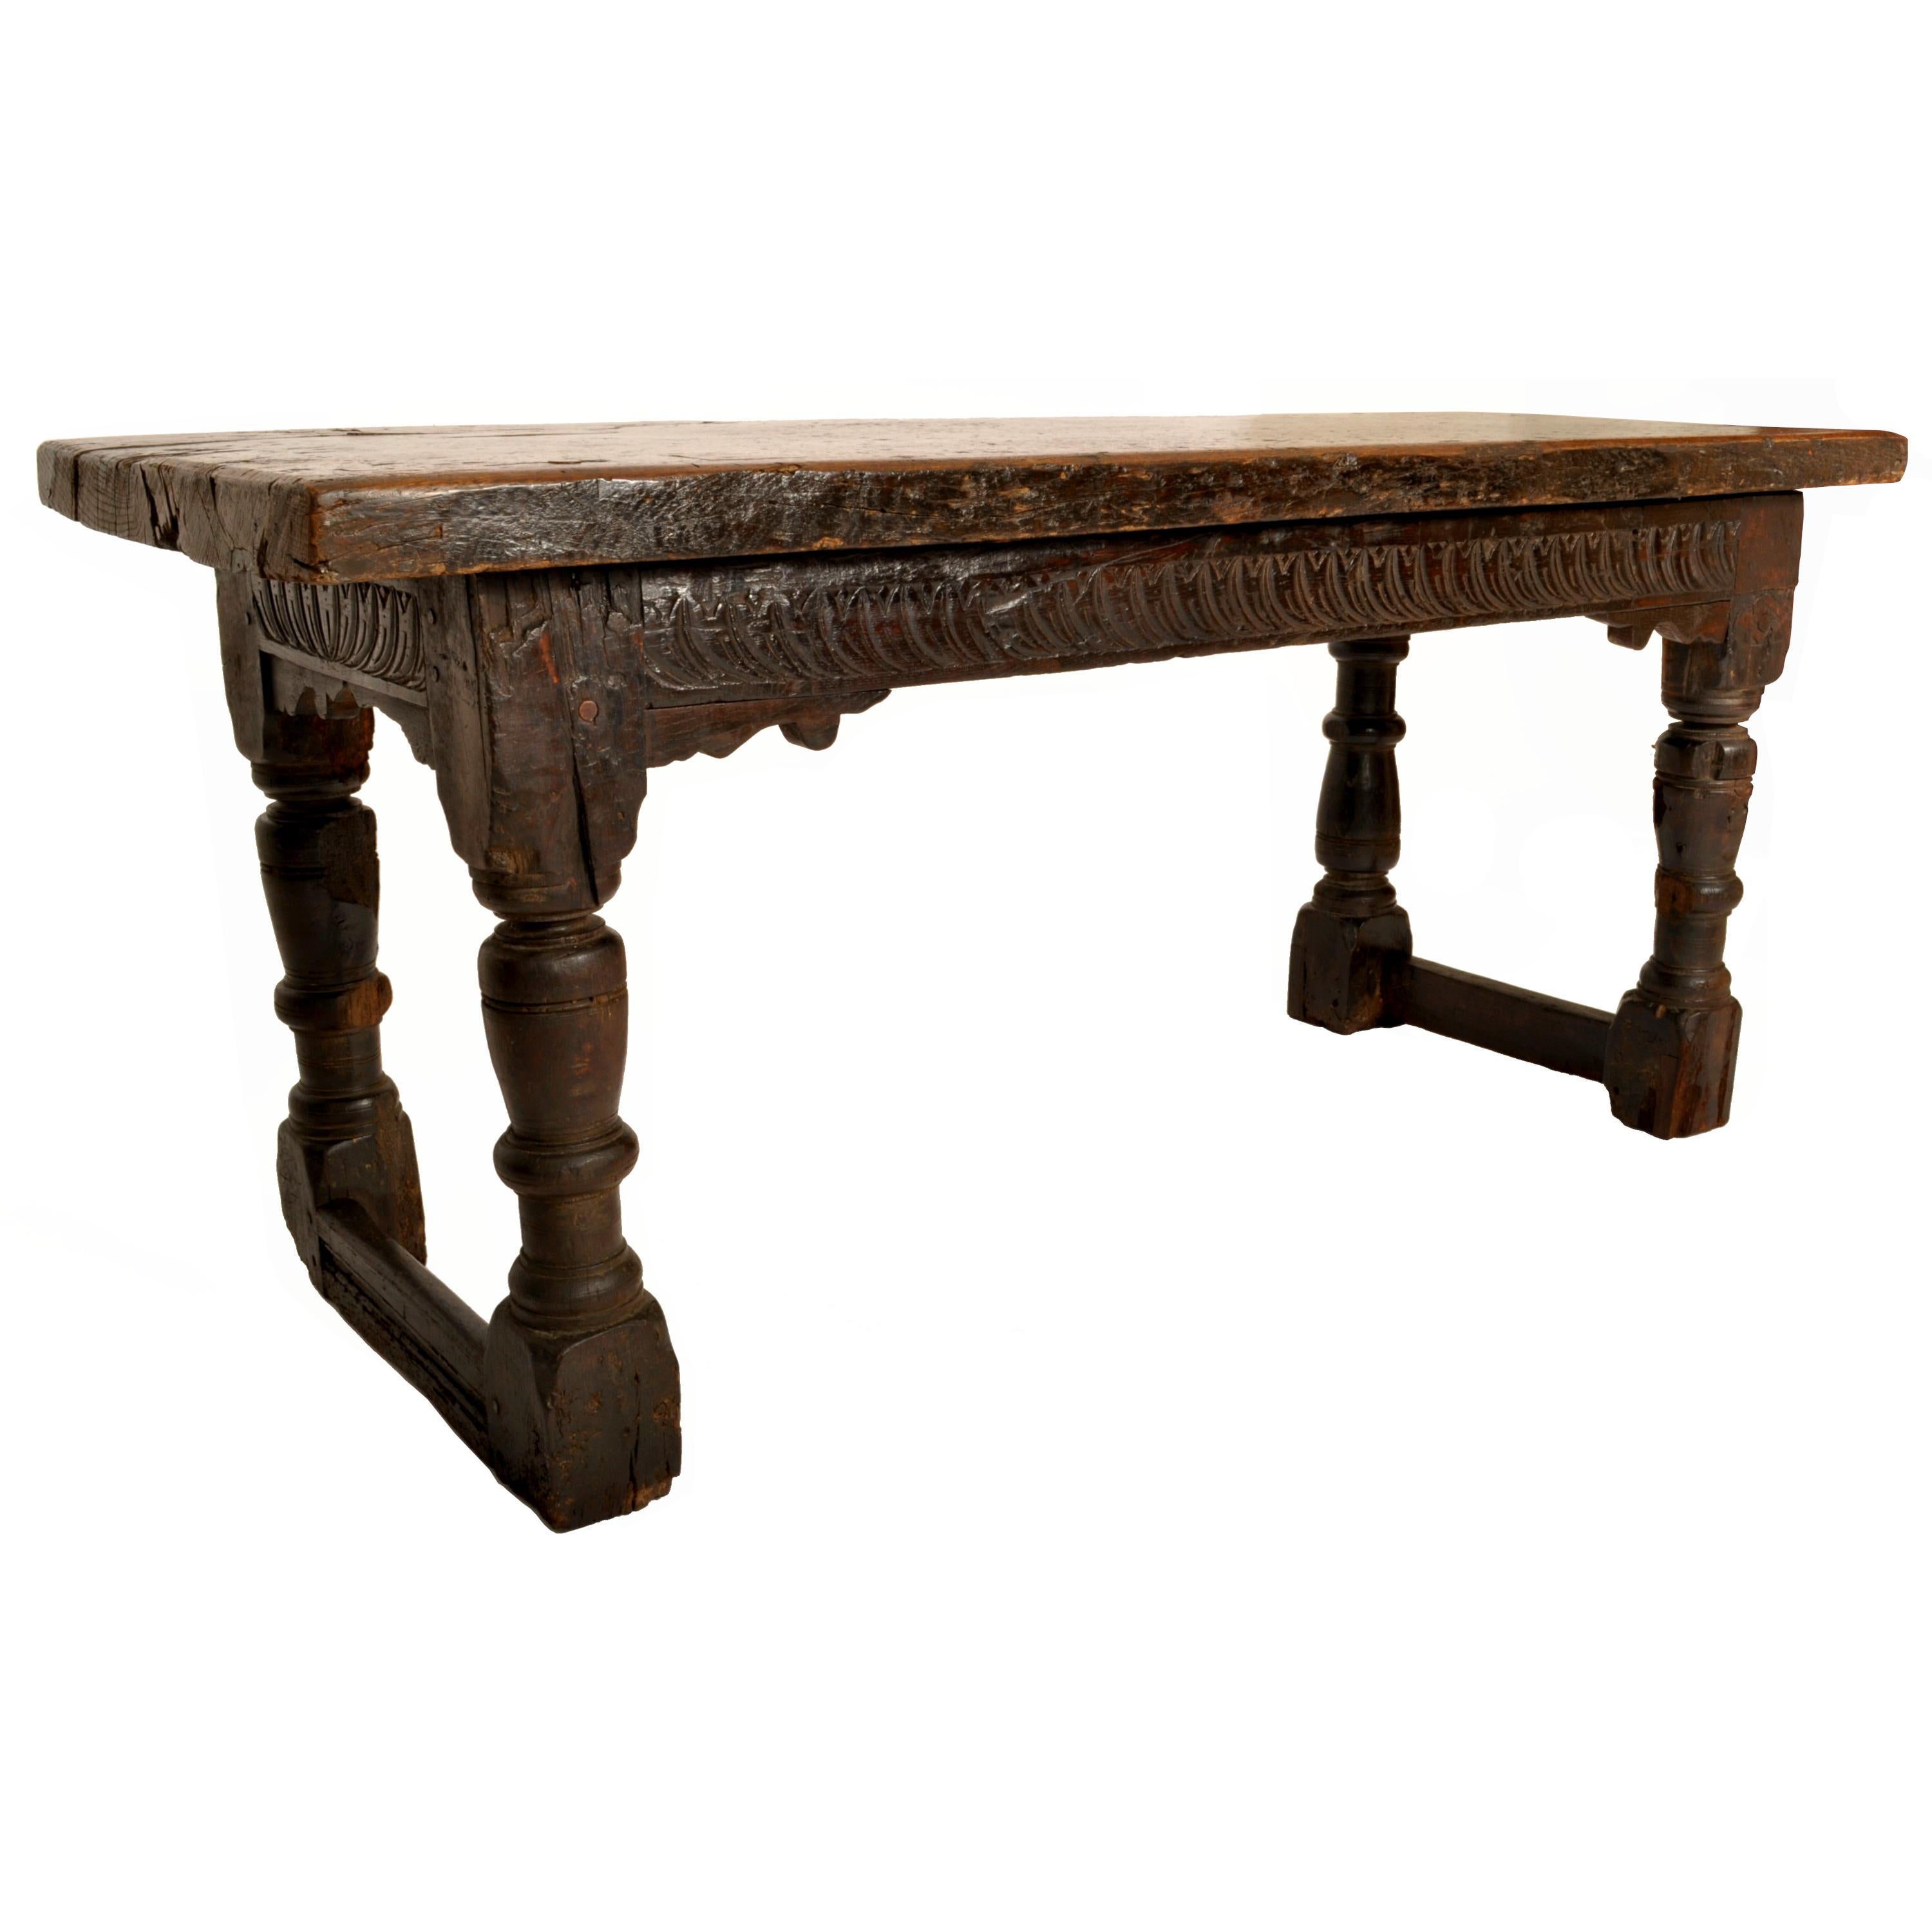 A very rare and original antique 500+ year old carved Tudor refectory/serving table, circa 1550.
The table dating from the reign of Henry VIII and having a very substantial plank top (over 2.5